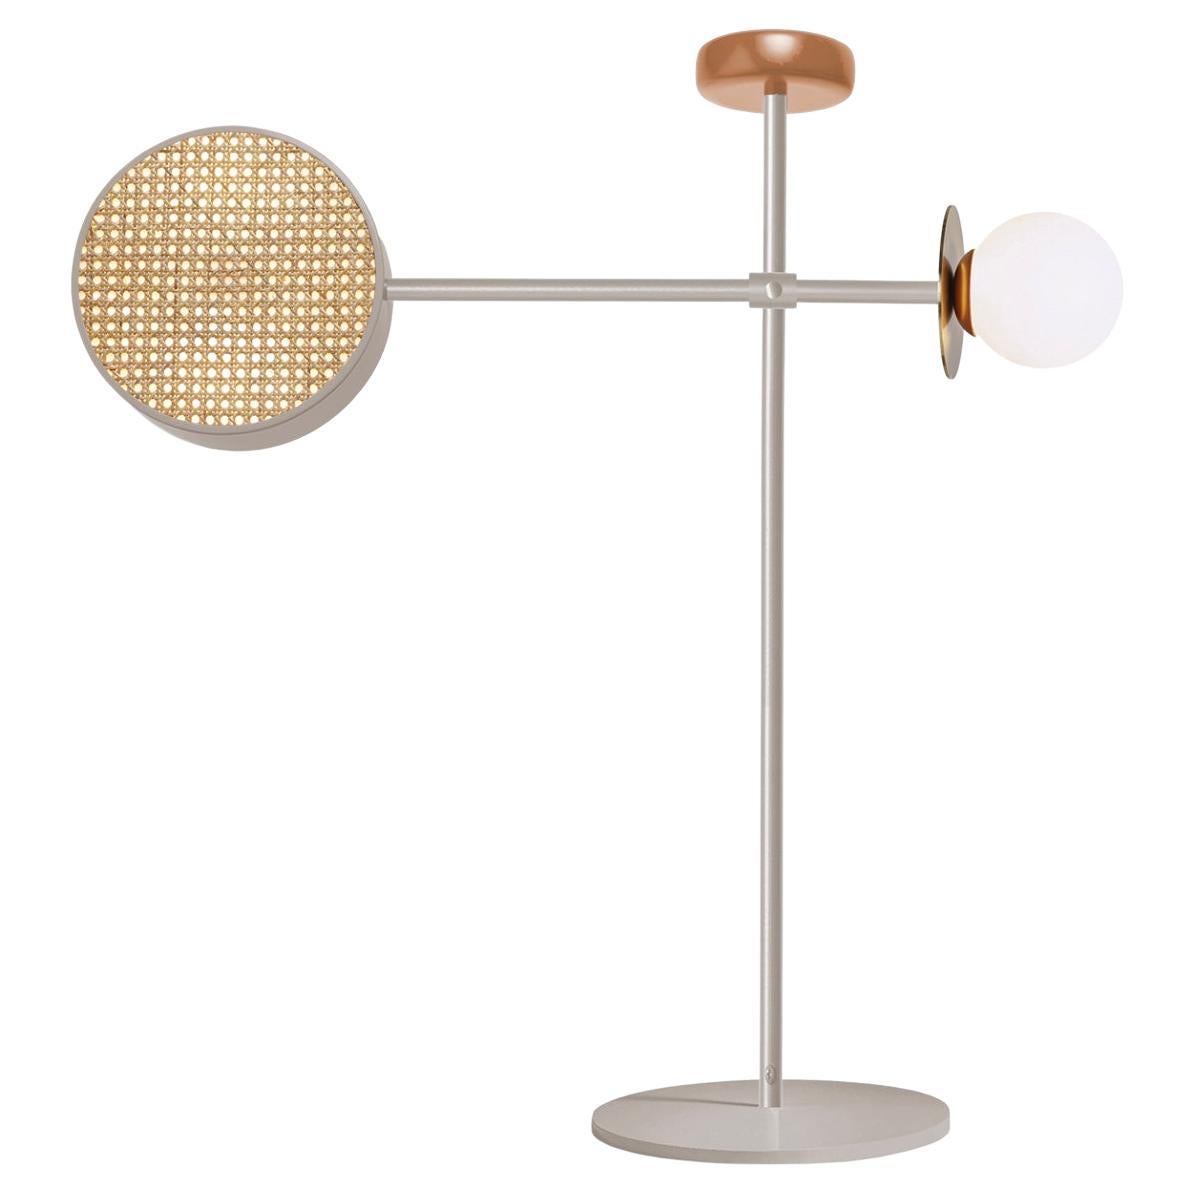 Art Deco inspired Monaco Floor Lamp in Taupe and Powder and Brass